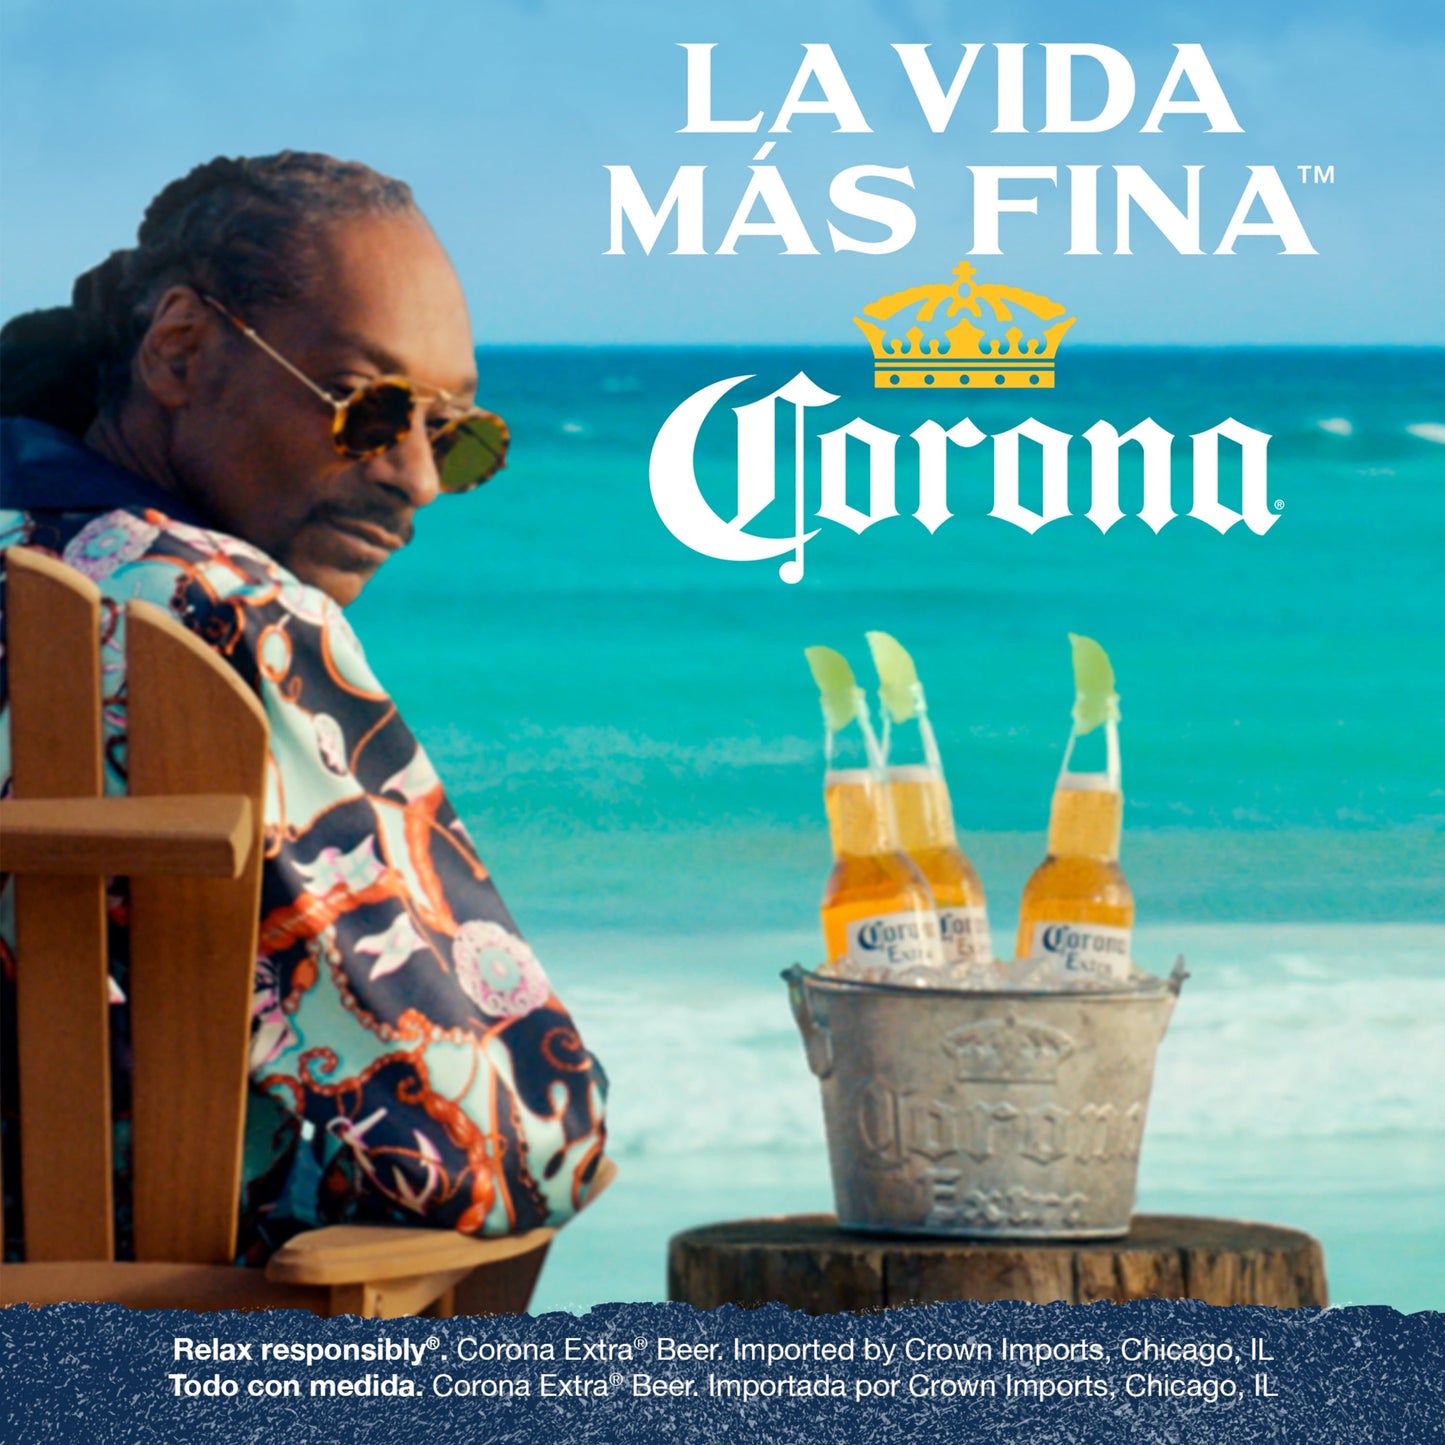 Corona Extra Coronita Mexican Lager Import Beer, 24 Pack Beer, 7 fl oz Mini Bottles, 4.6% ABV